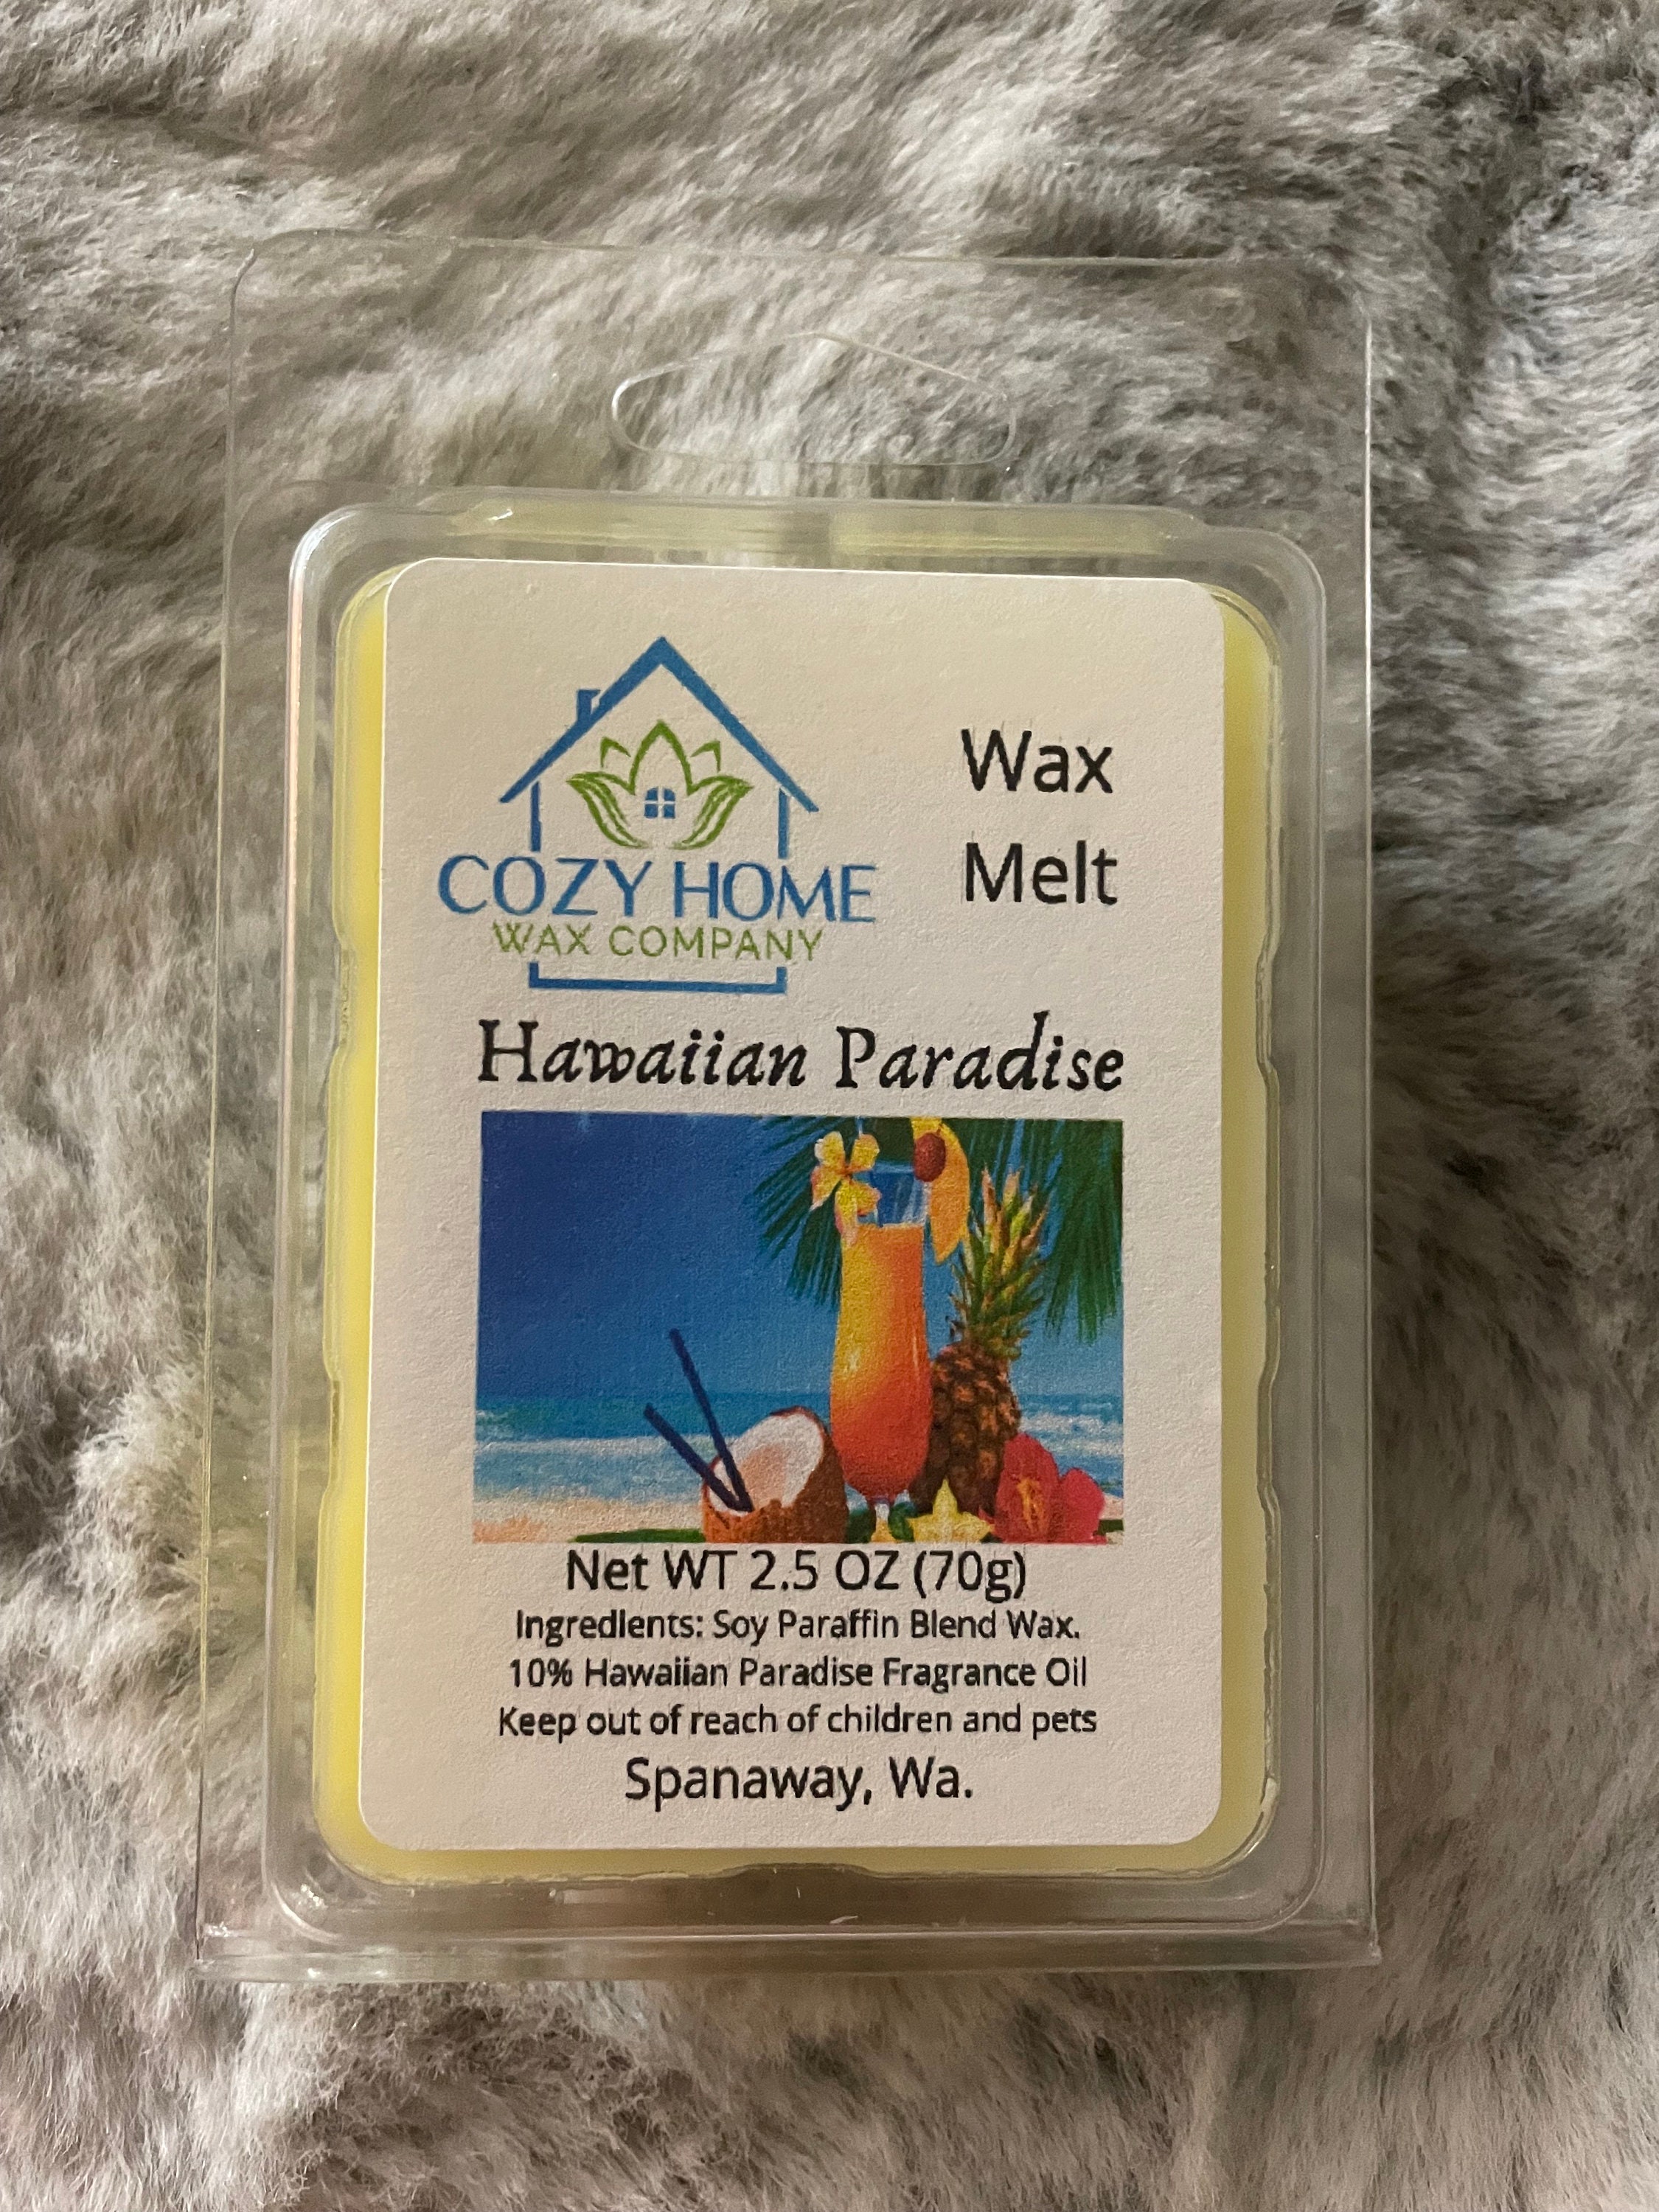 Pineapple Paradise Soy Blend Wax Melt – The Journey Within